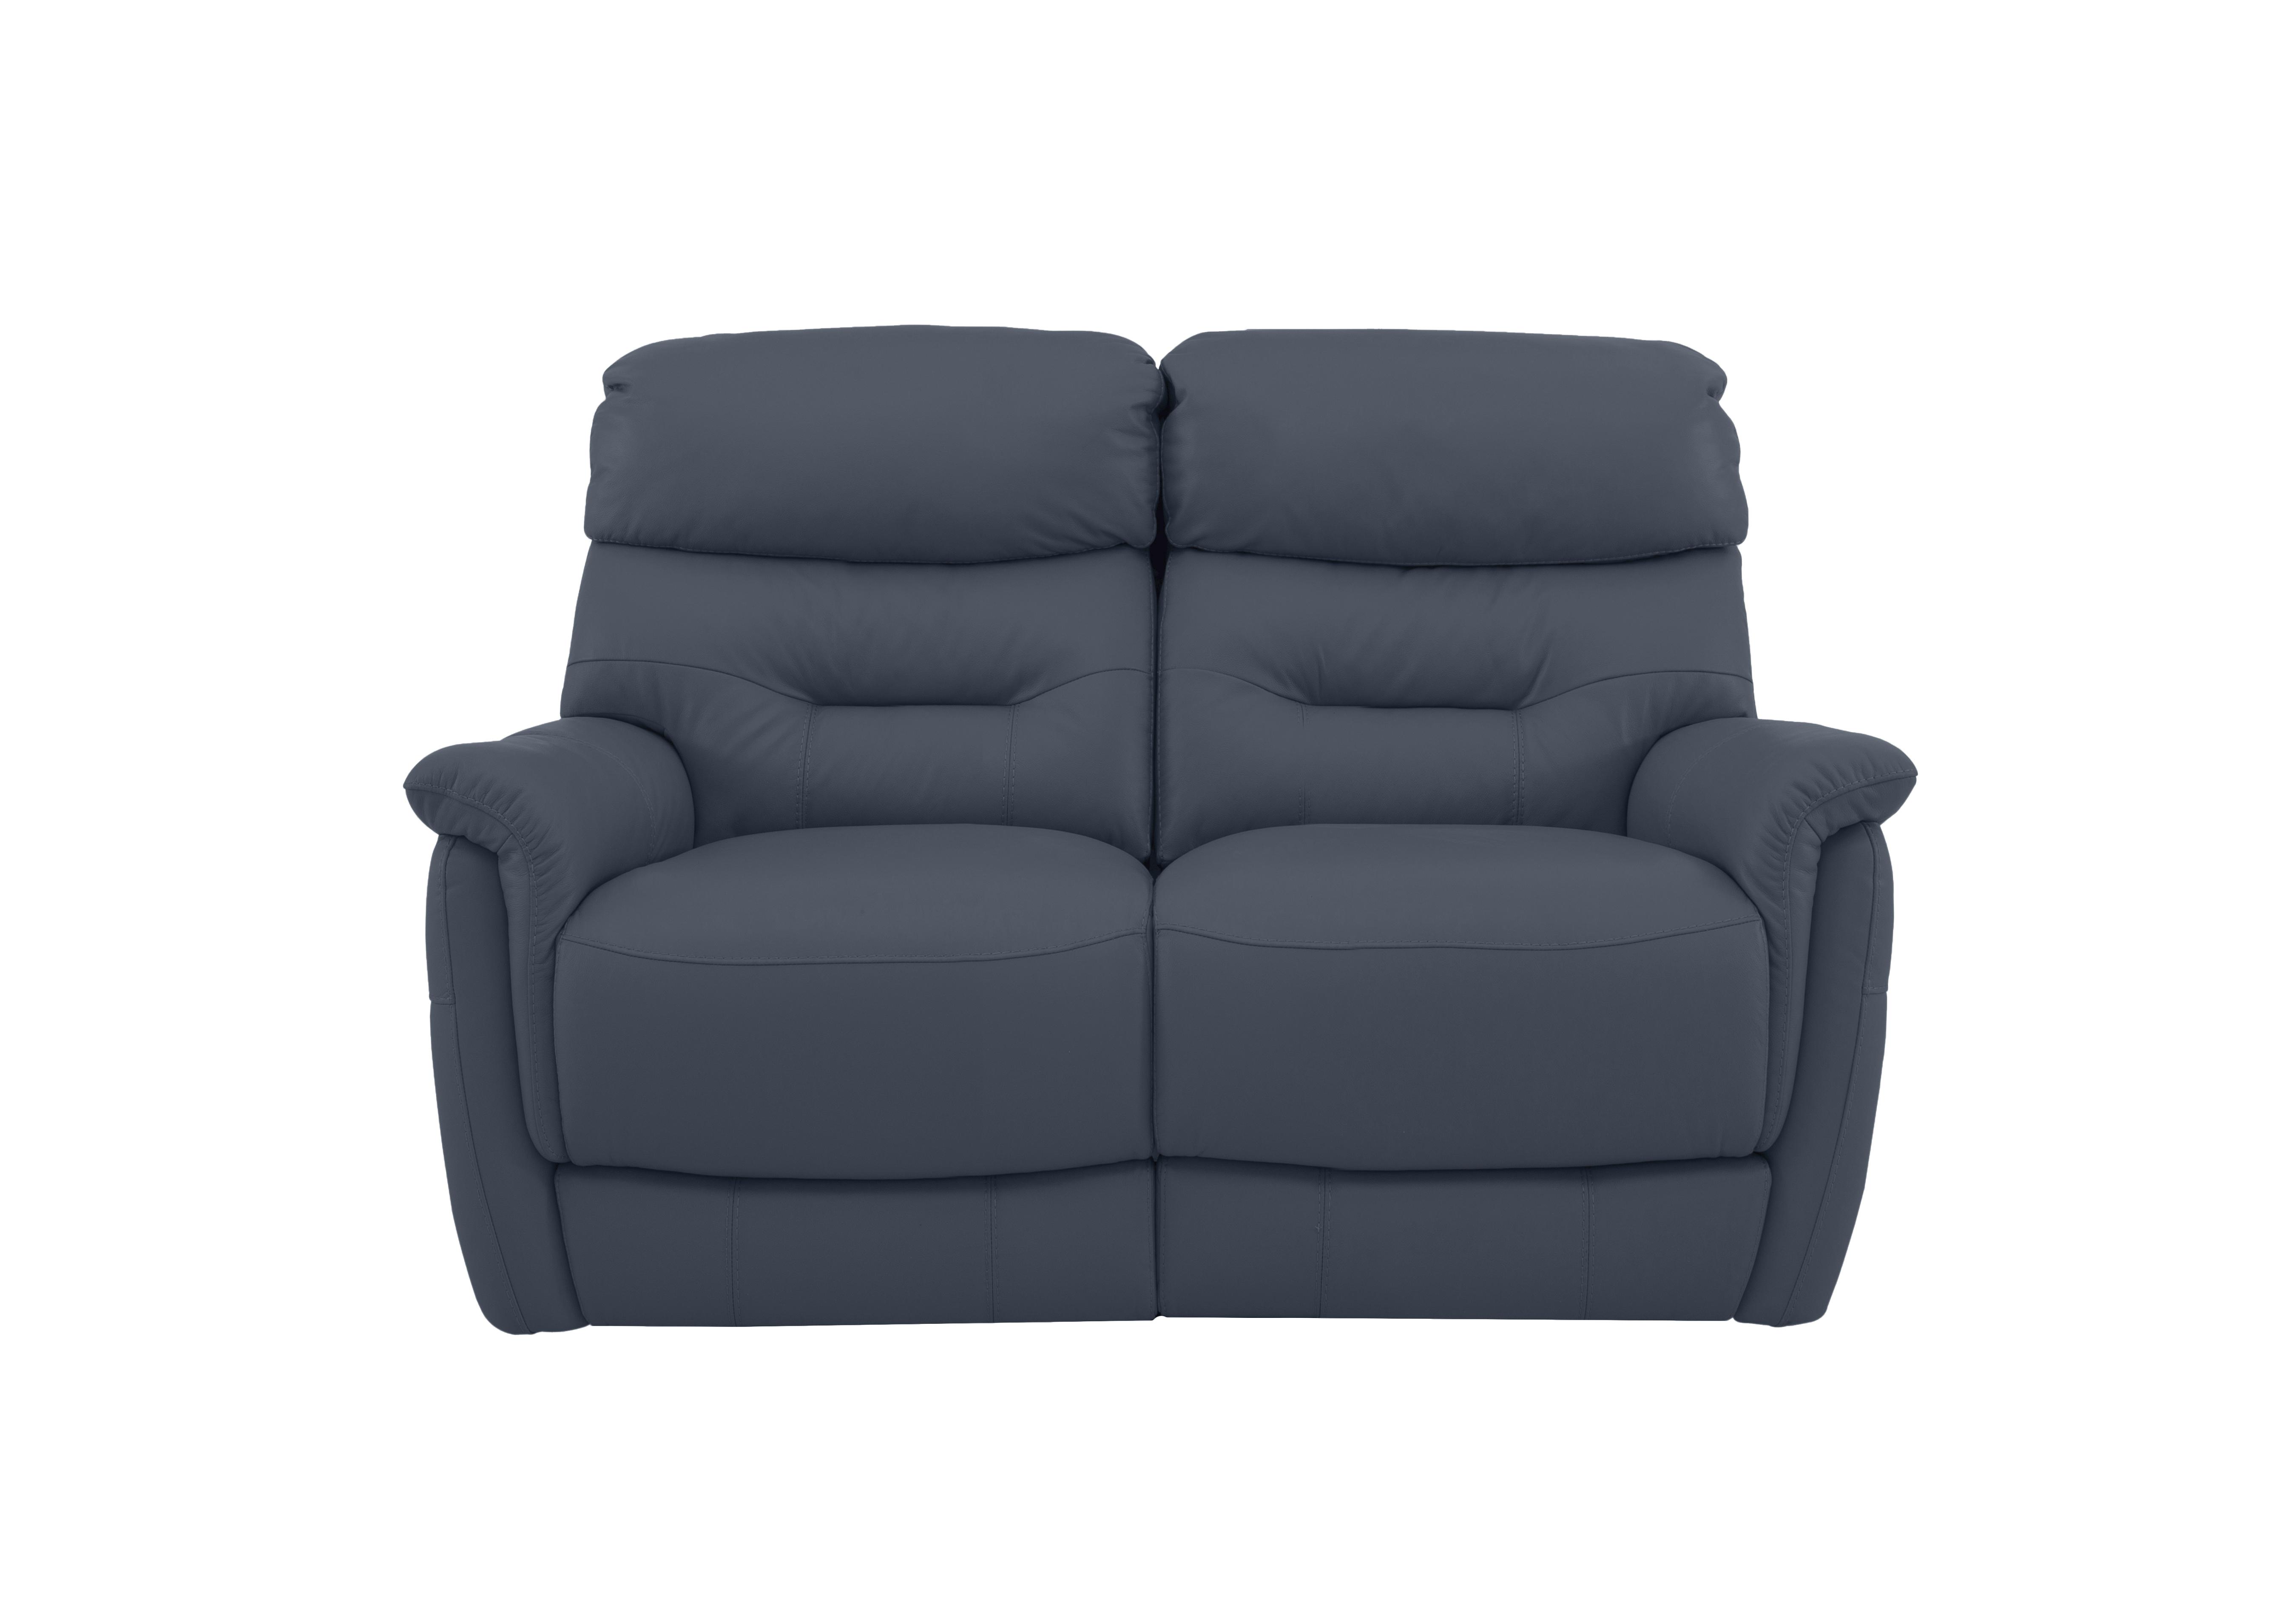 Chicago 2 Seater Leather Sofa in Bv-313e Ocean Blue on Furniture Village